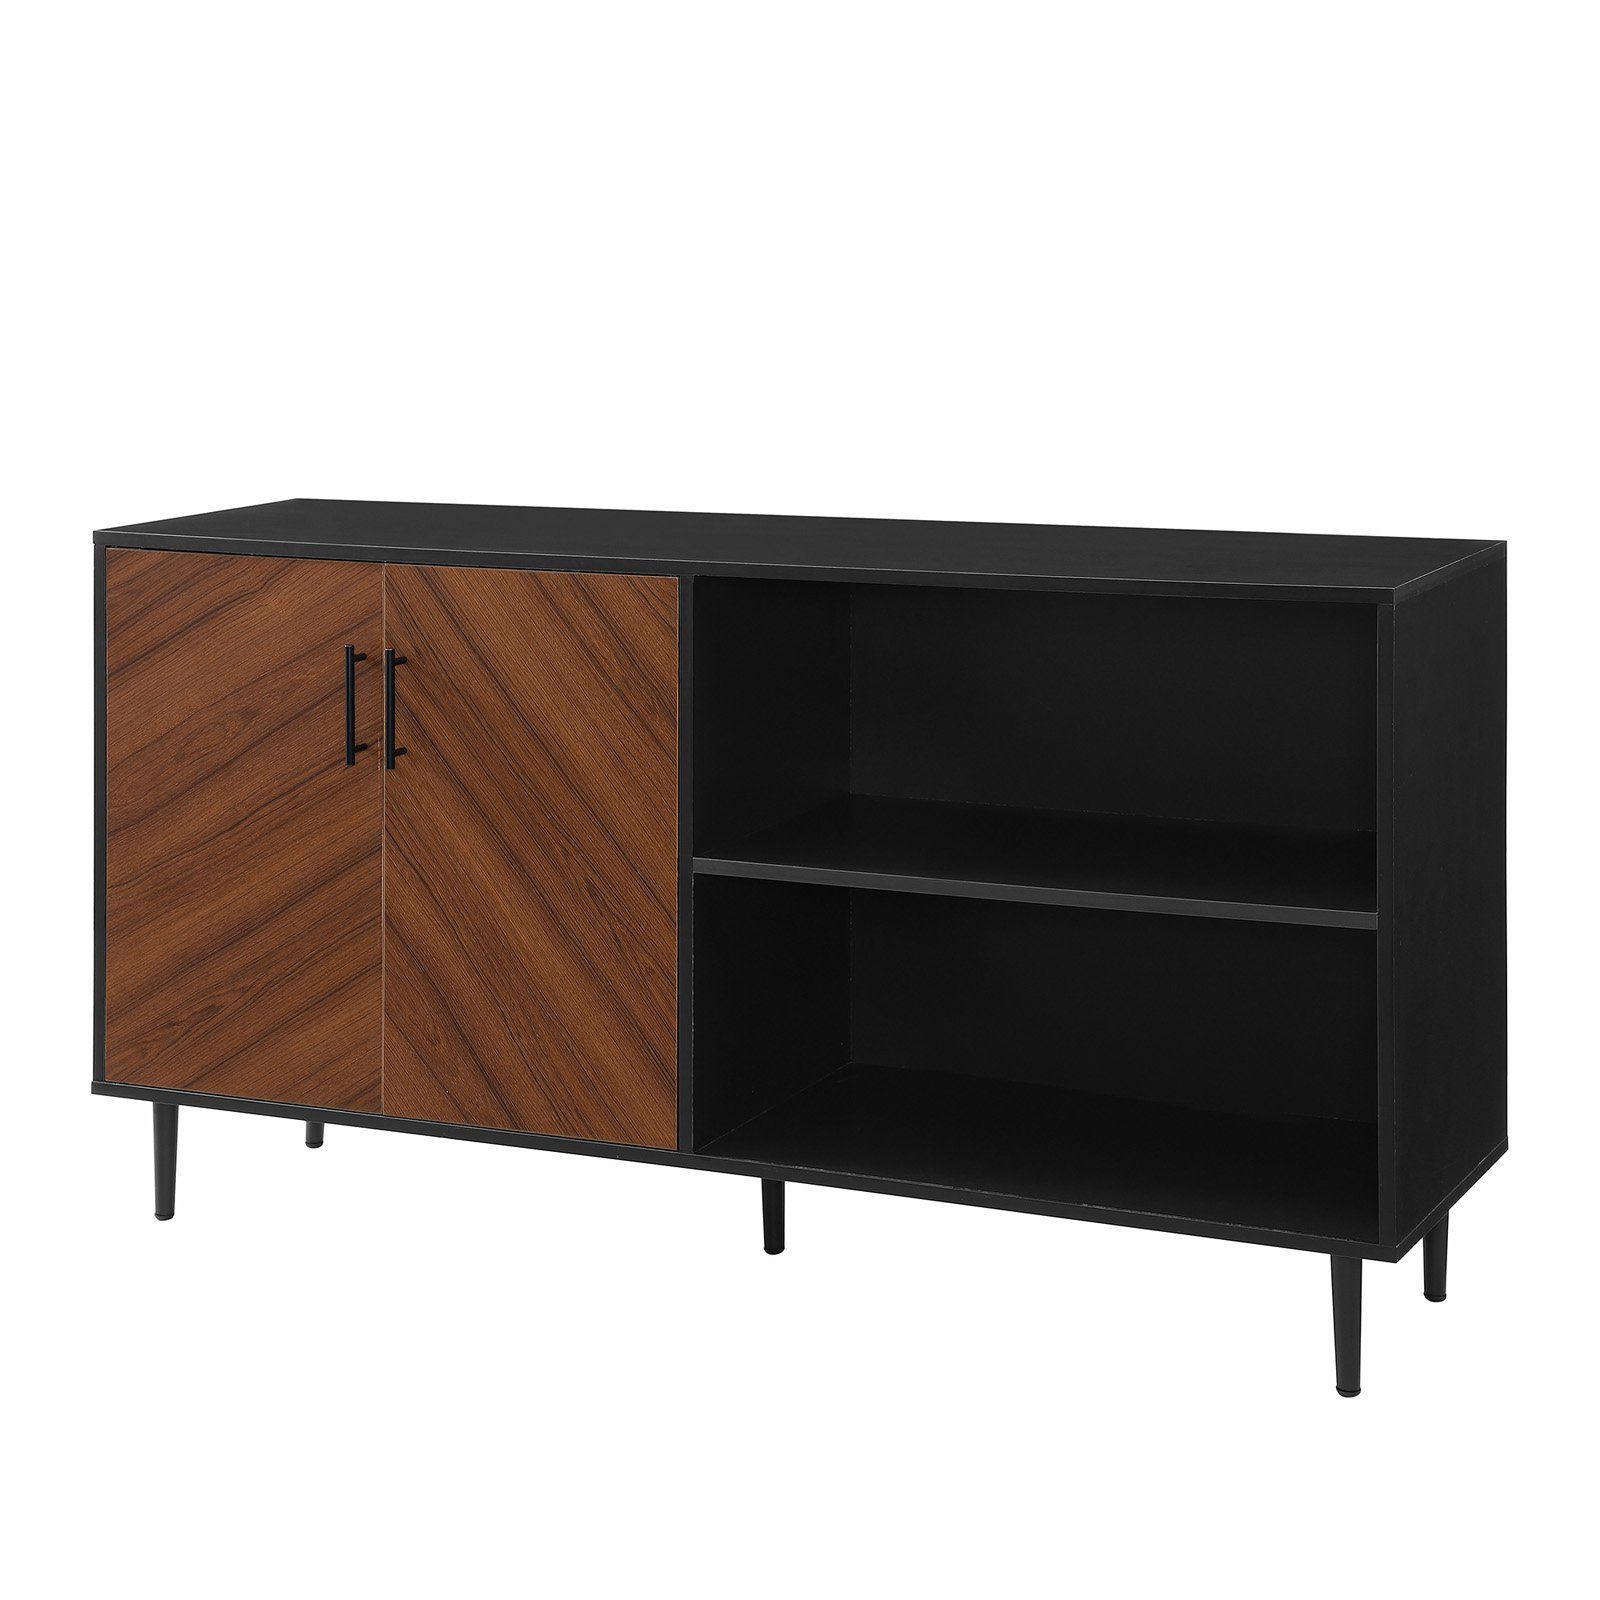 Manor Park Mid Century Modern Asymmetrical Tv Stand | Sleek Storage, Tv With Tv Stands With 2 Doors And 2 Open Shelves (View 9 of 20)